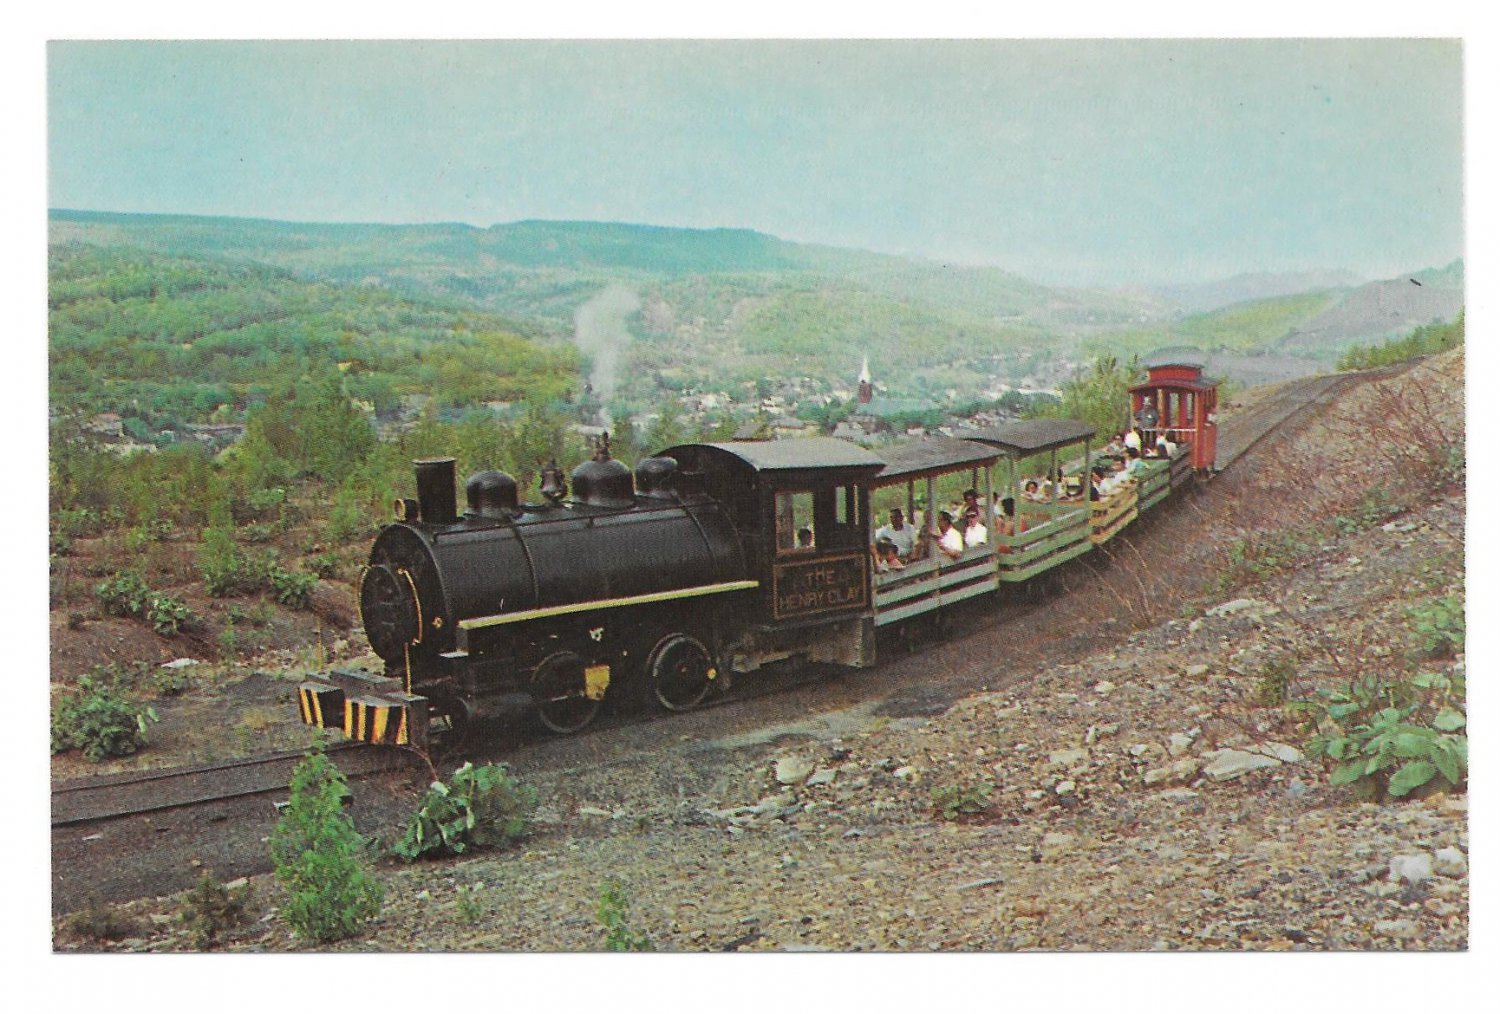 Sightseers Ride Old Steam Lokie Anthracite Coal Train Postcard Ashland PA RR